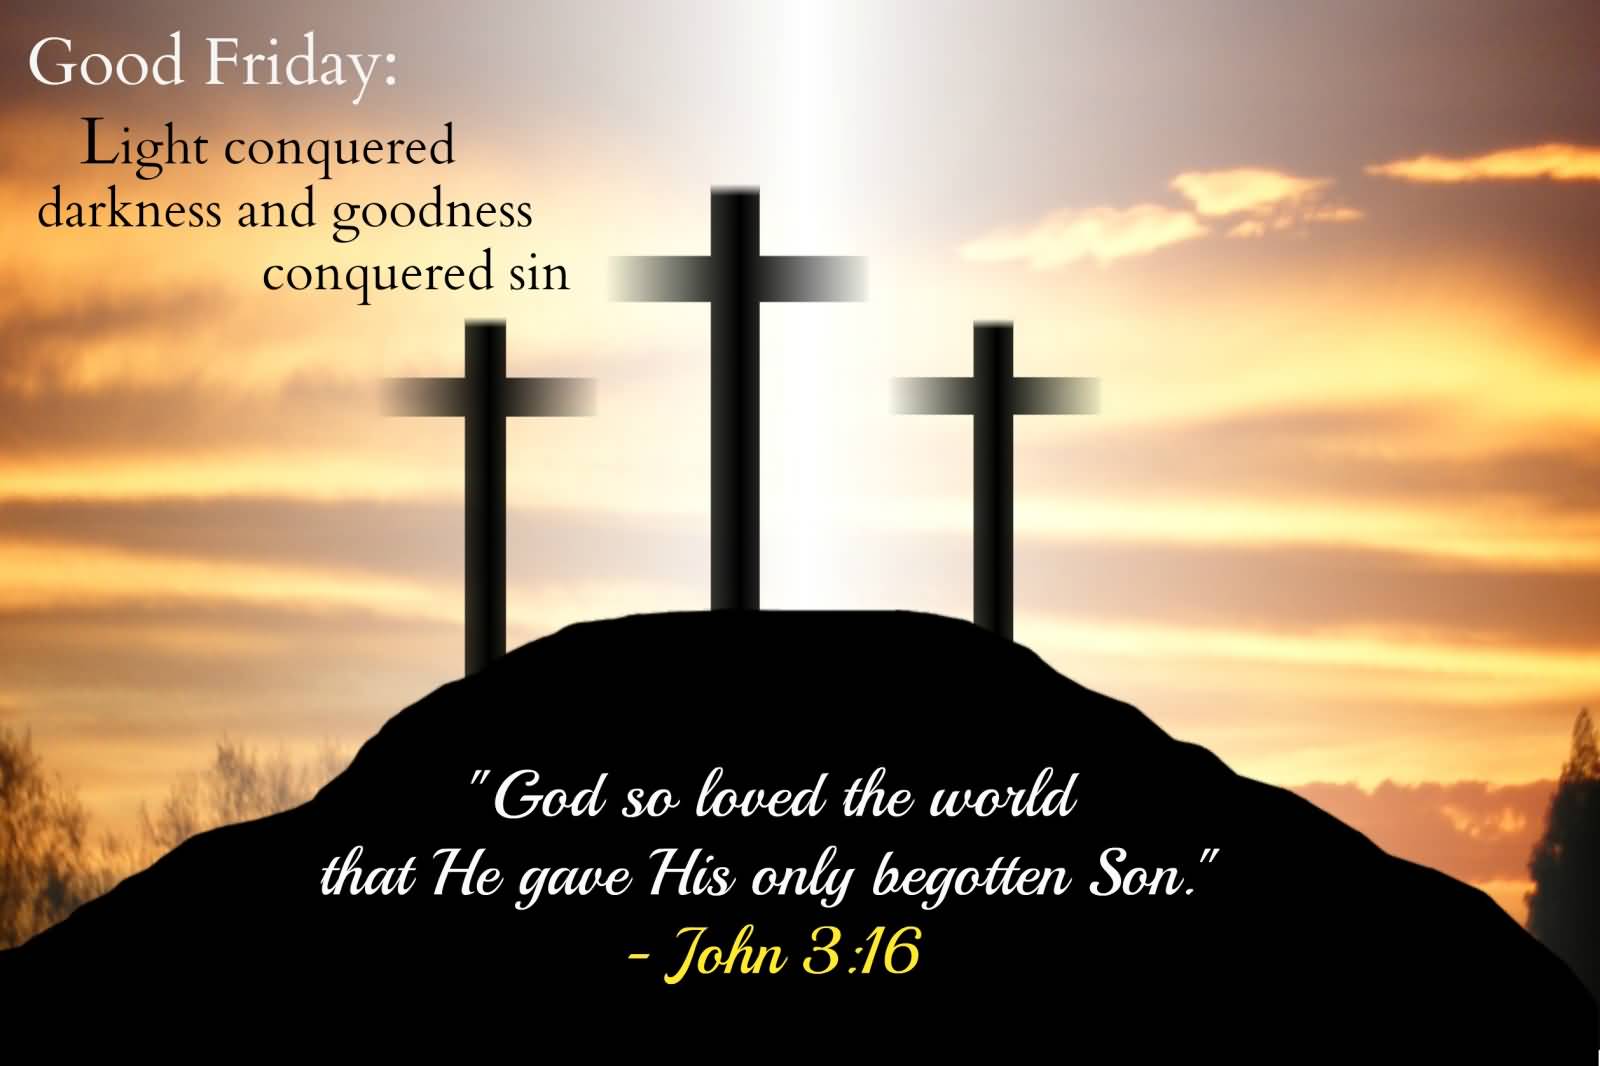 Good Friday Light Conquered Darkness And Goodness Conquered Sin